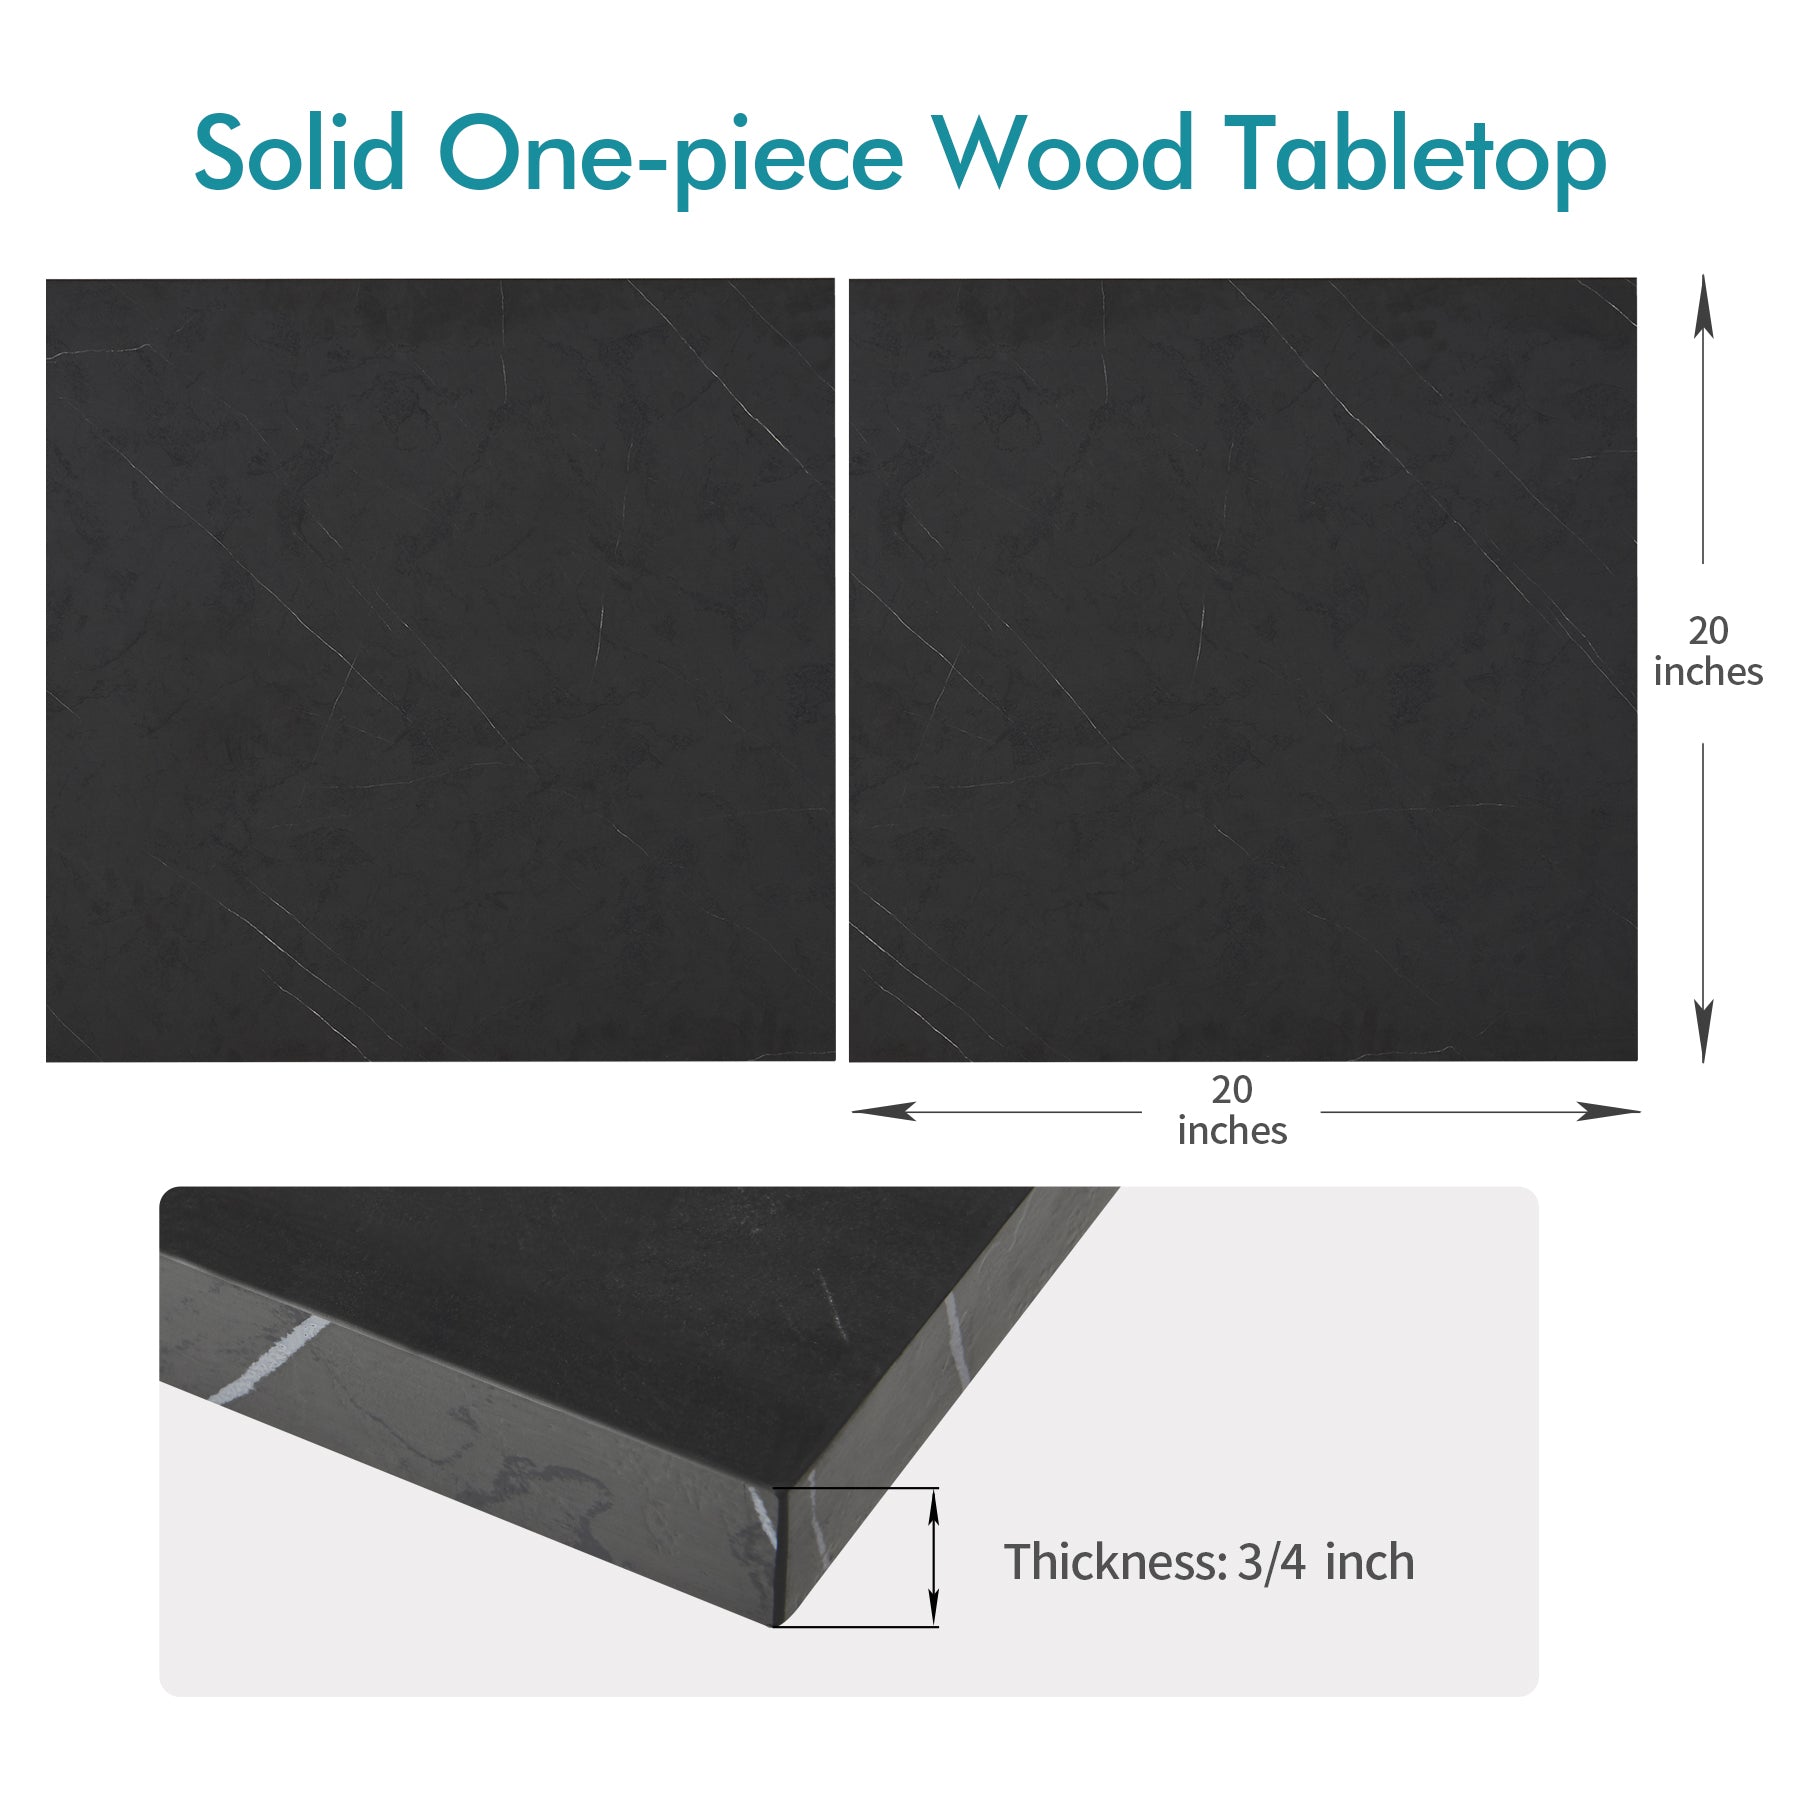 20x20 one-piece wood table top in black